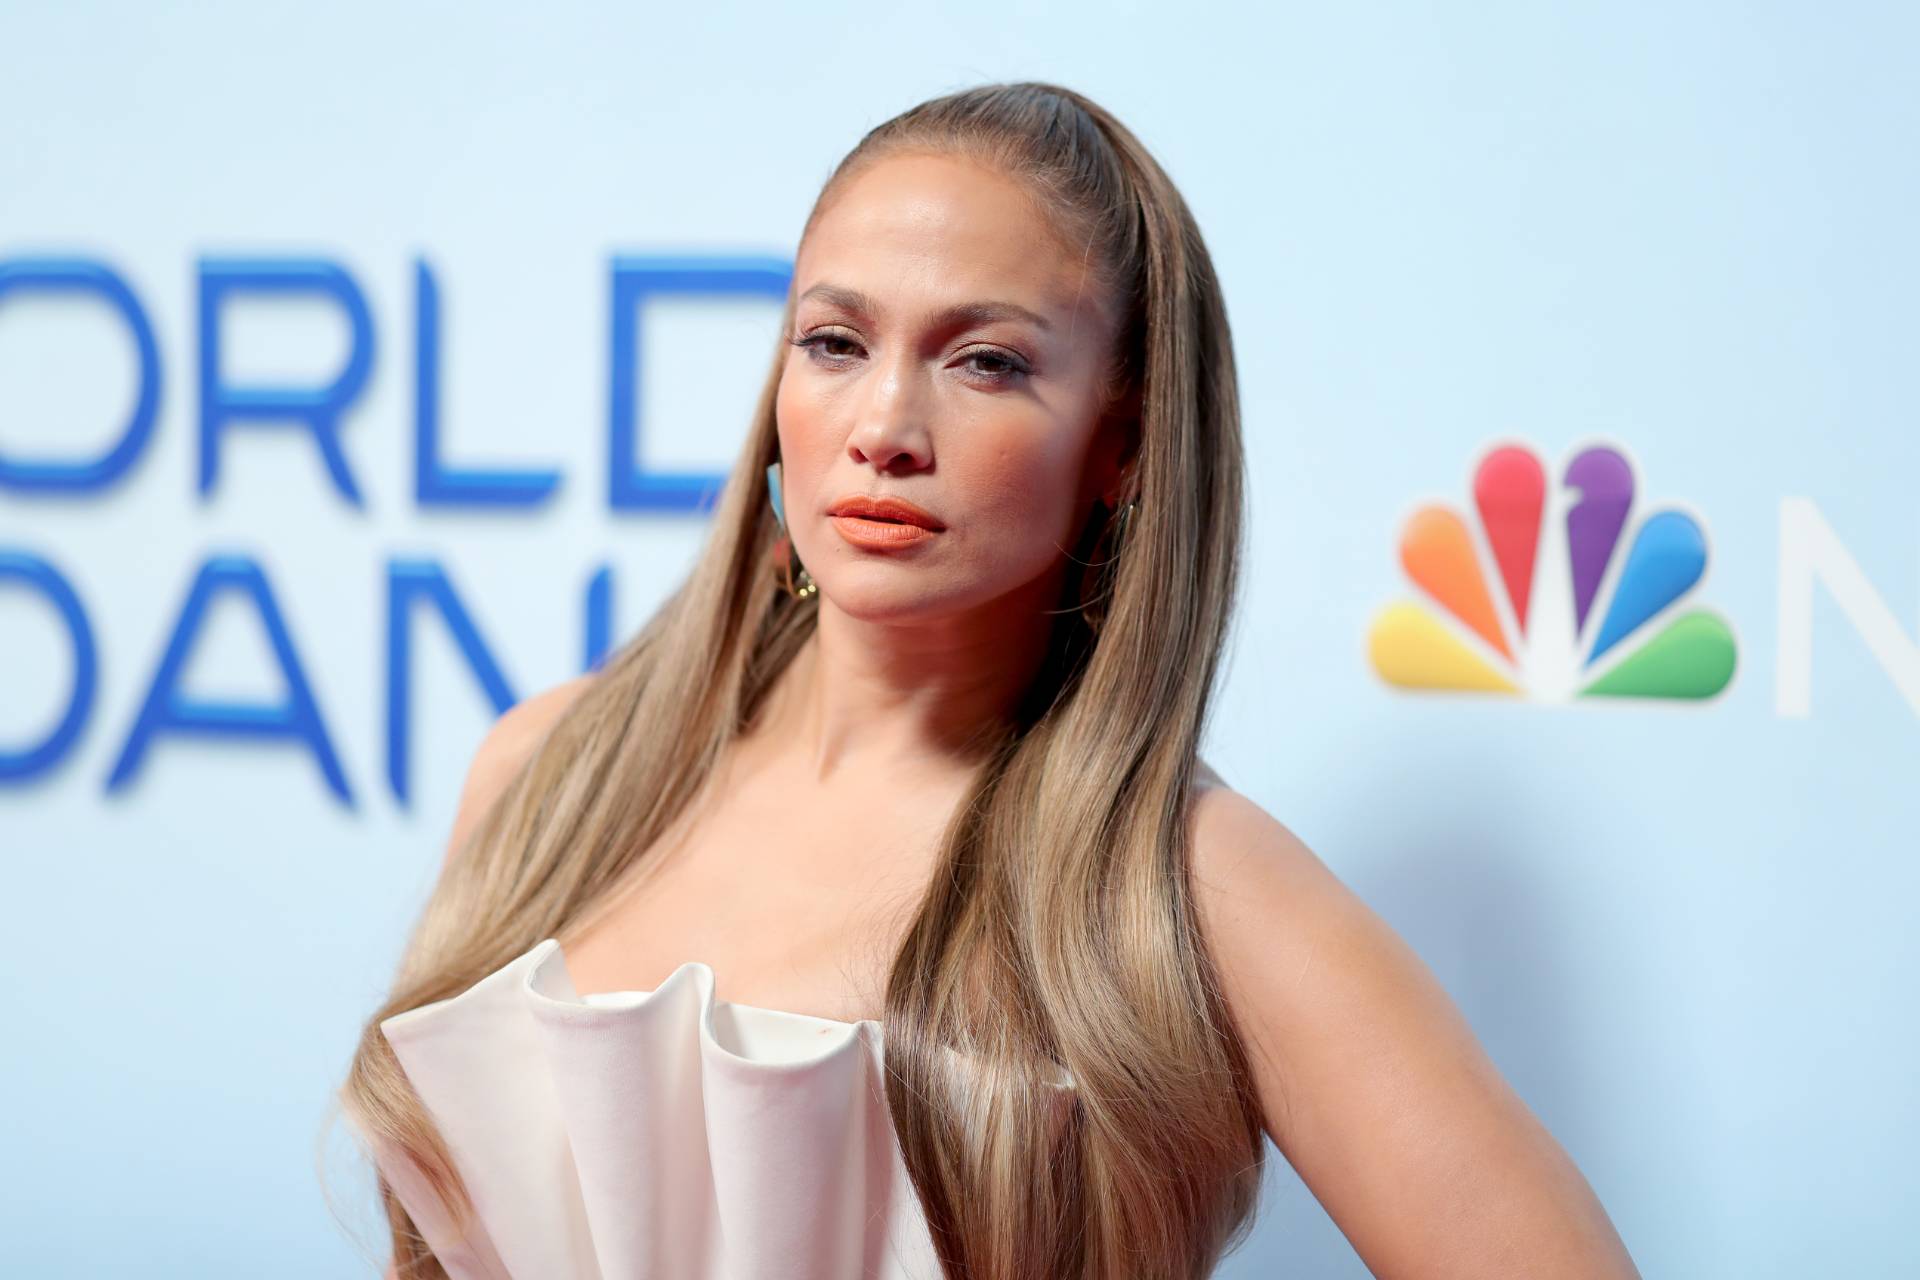 Jennifer Lopez Says She ‘Felt Abused’ in Some of Her Relationships